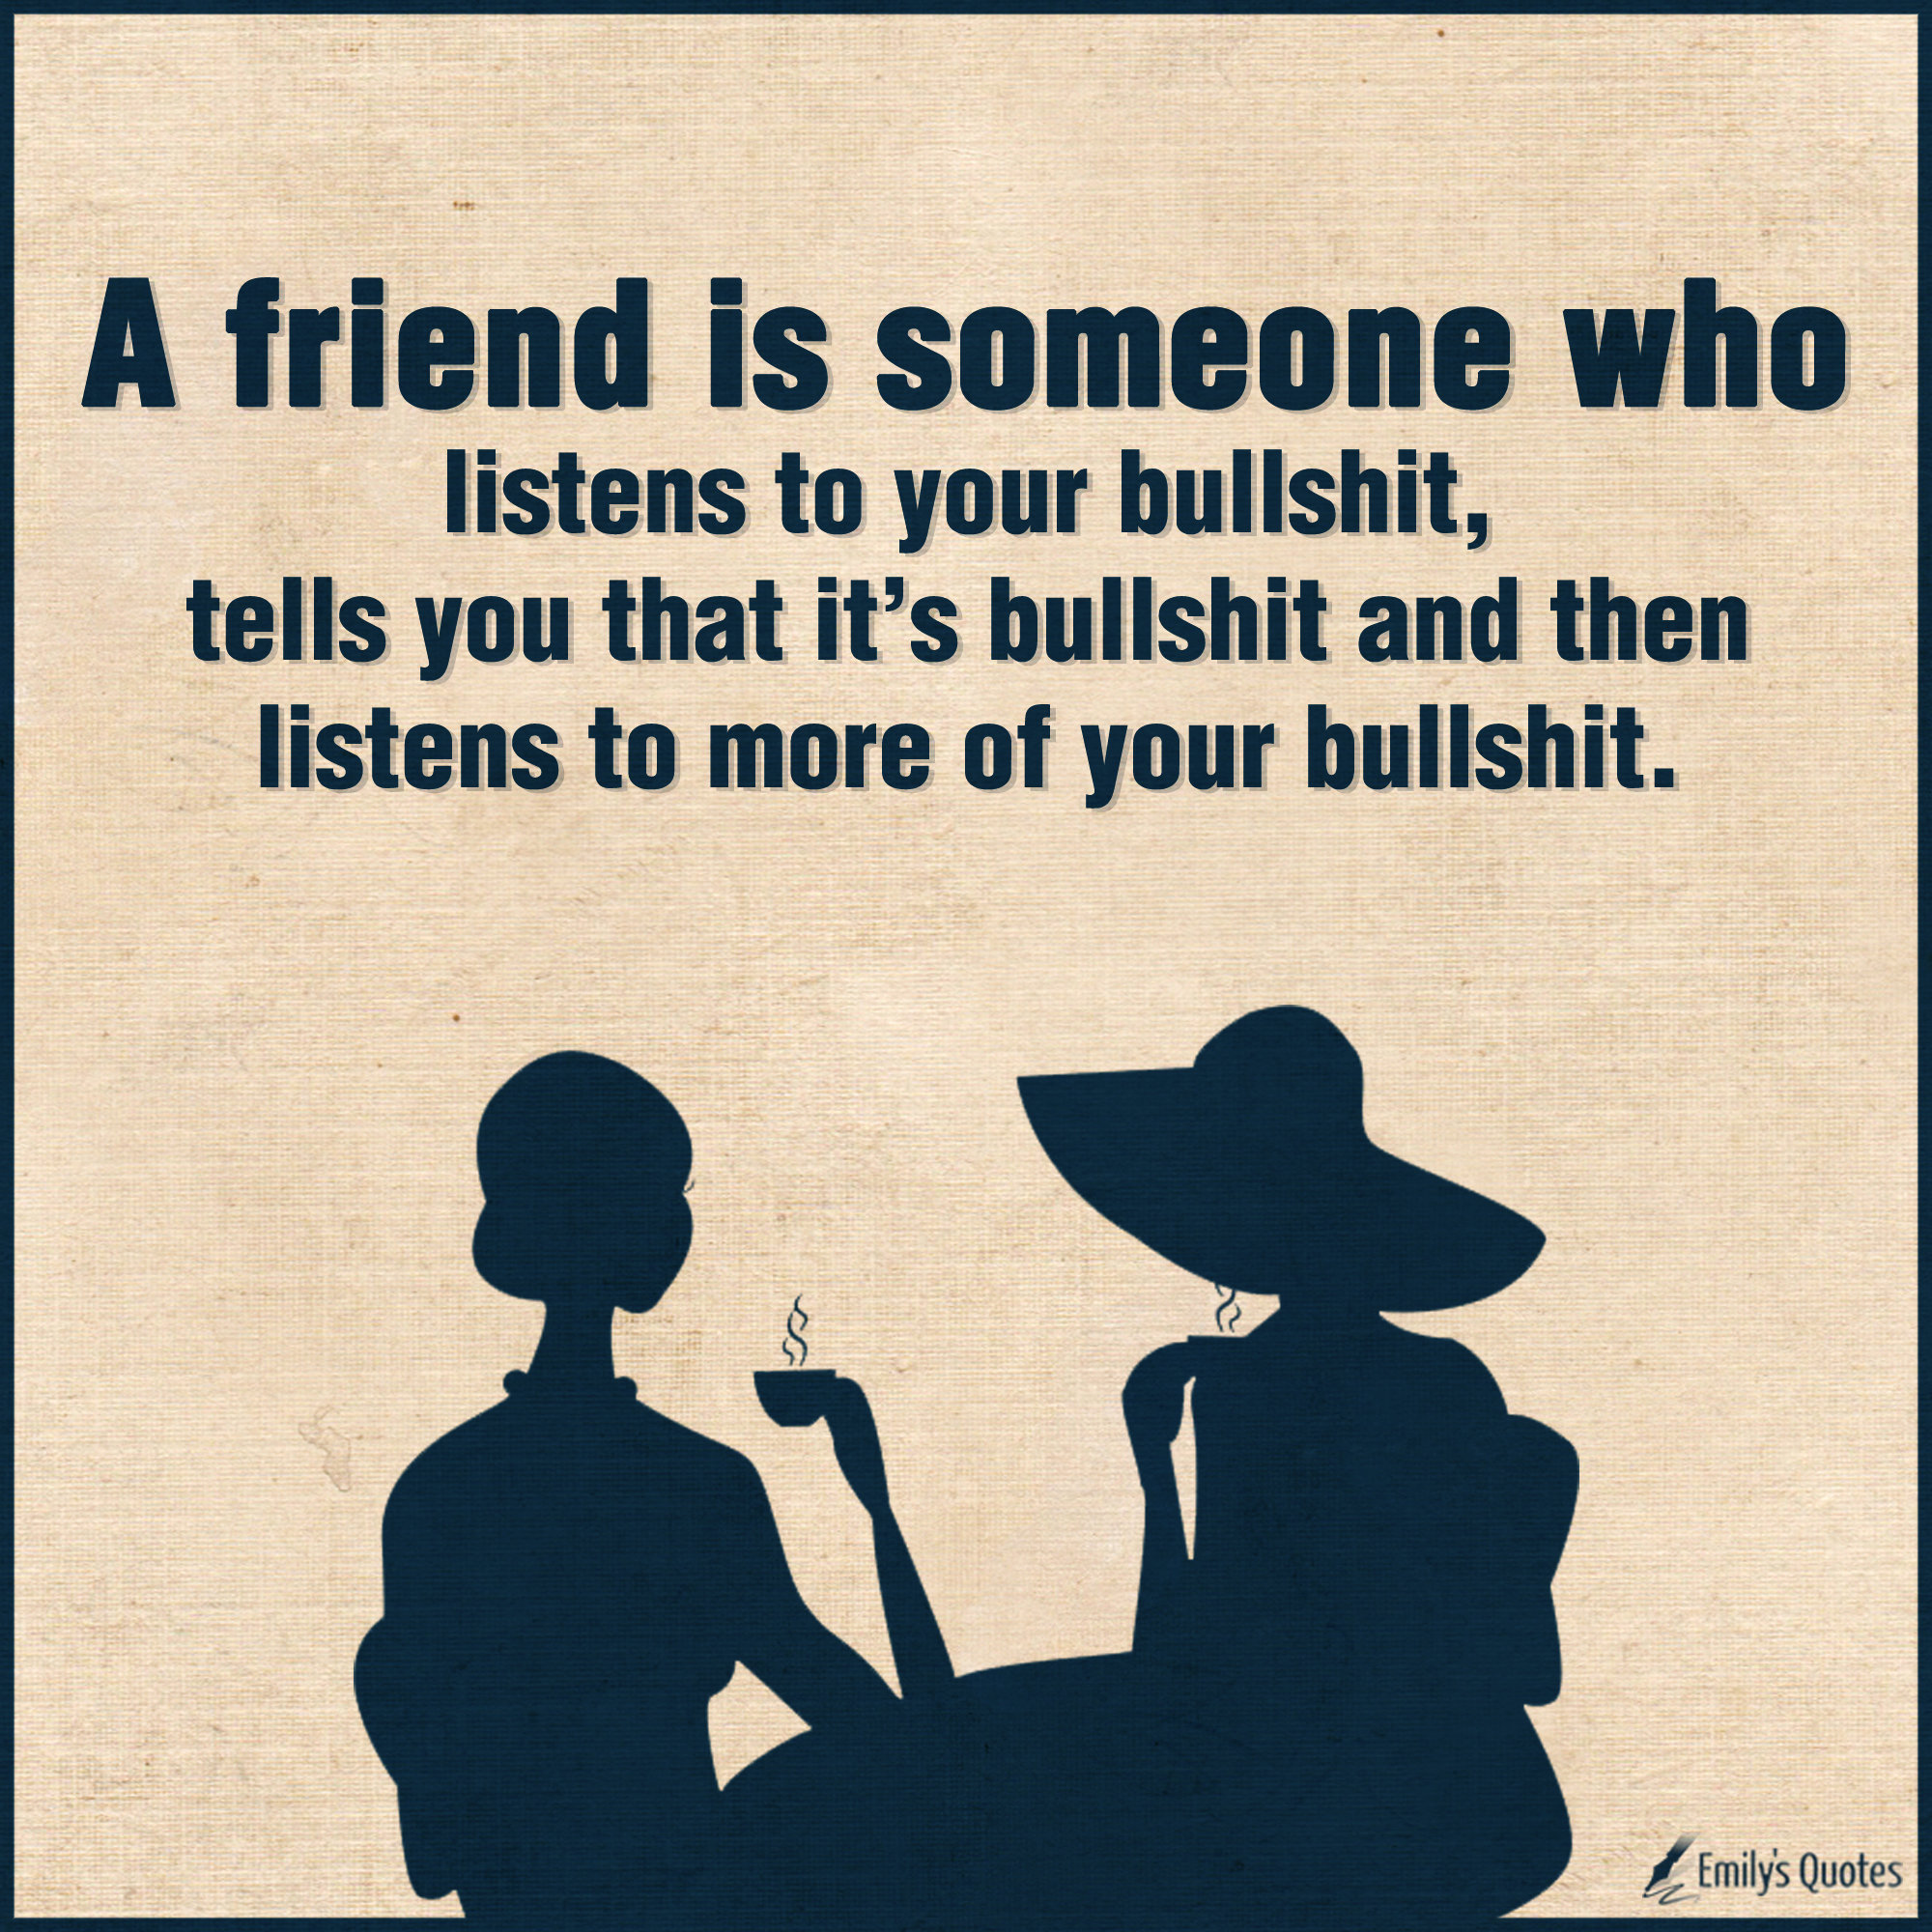 A friend is someone who listens to your bullshit, tells you that